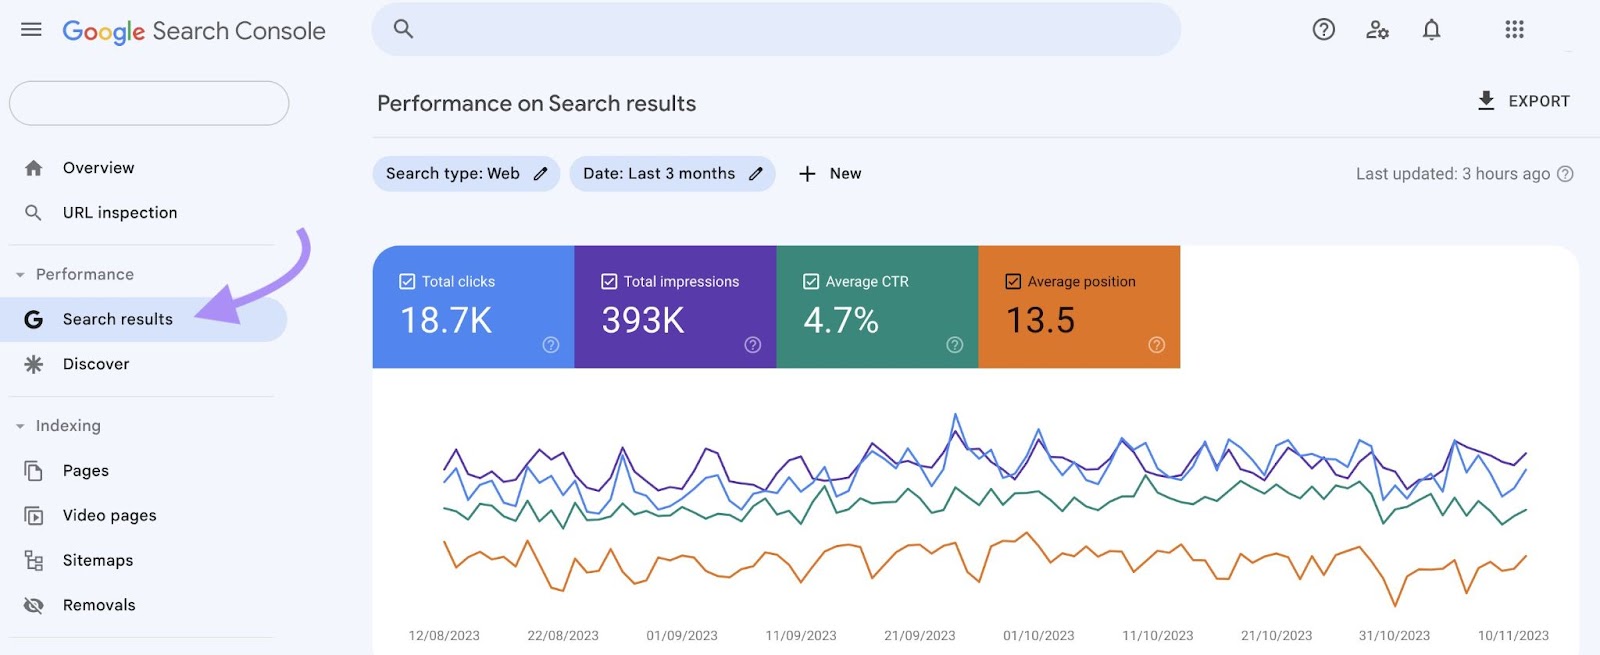 "Performance on search results" graph in Google Search Console